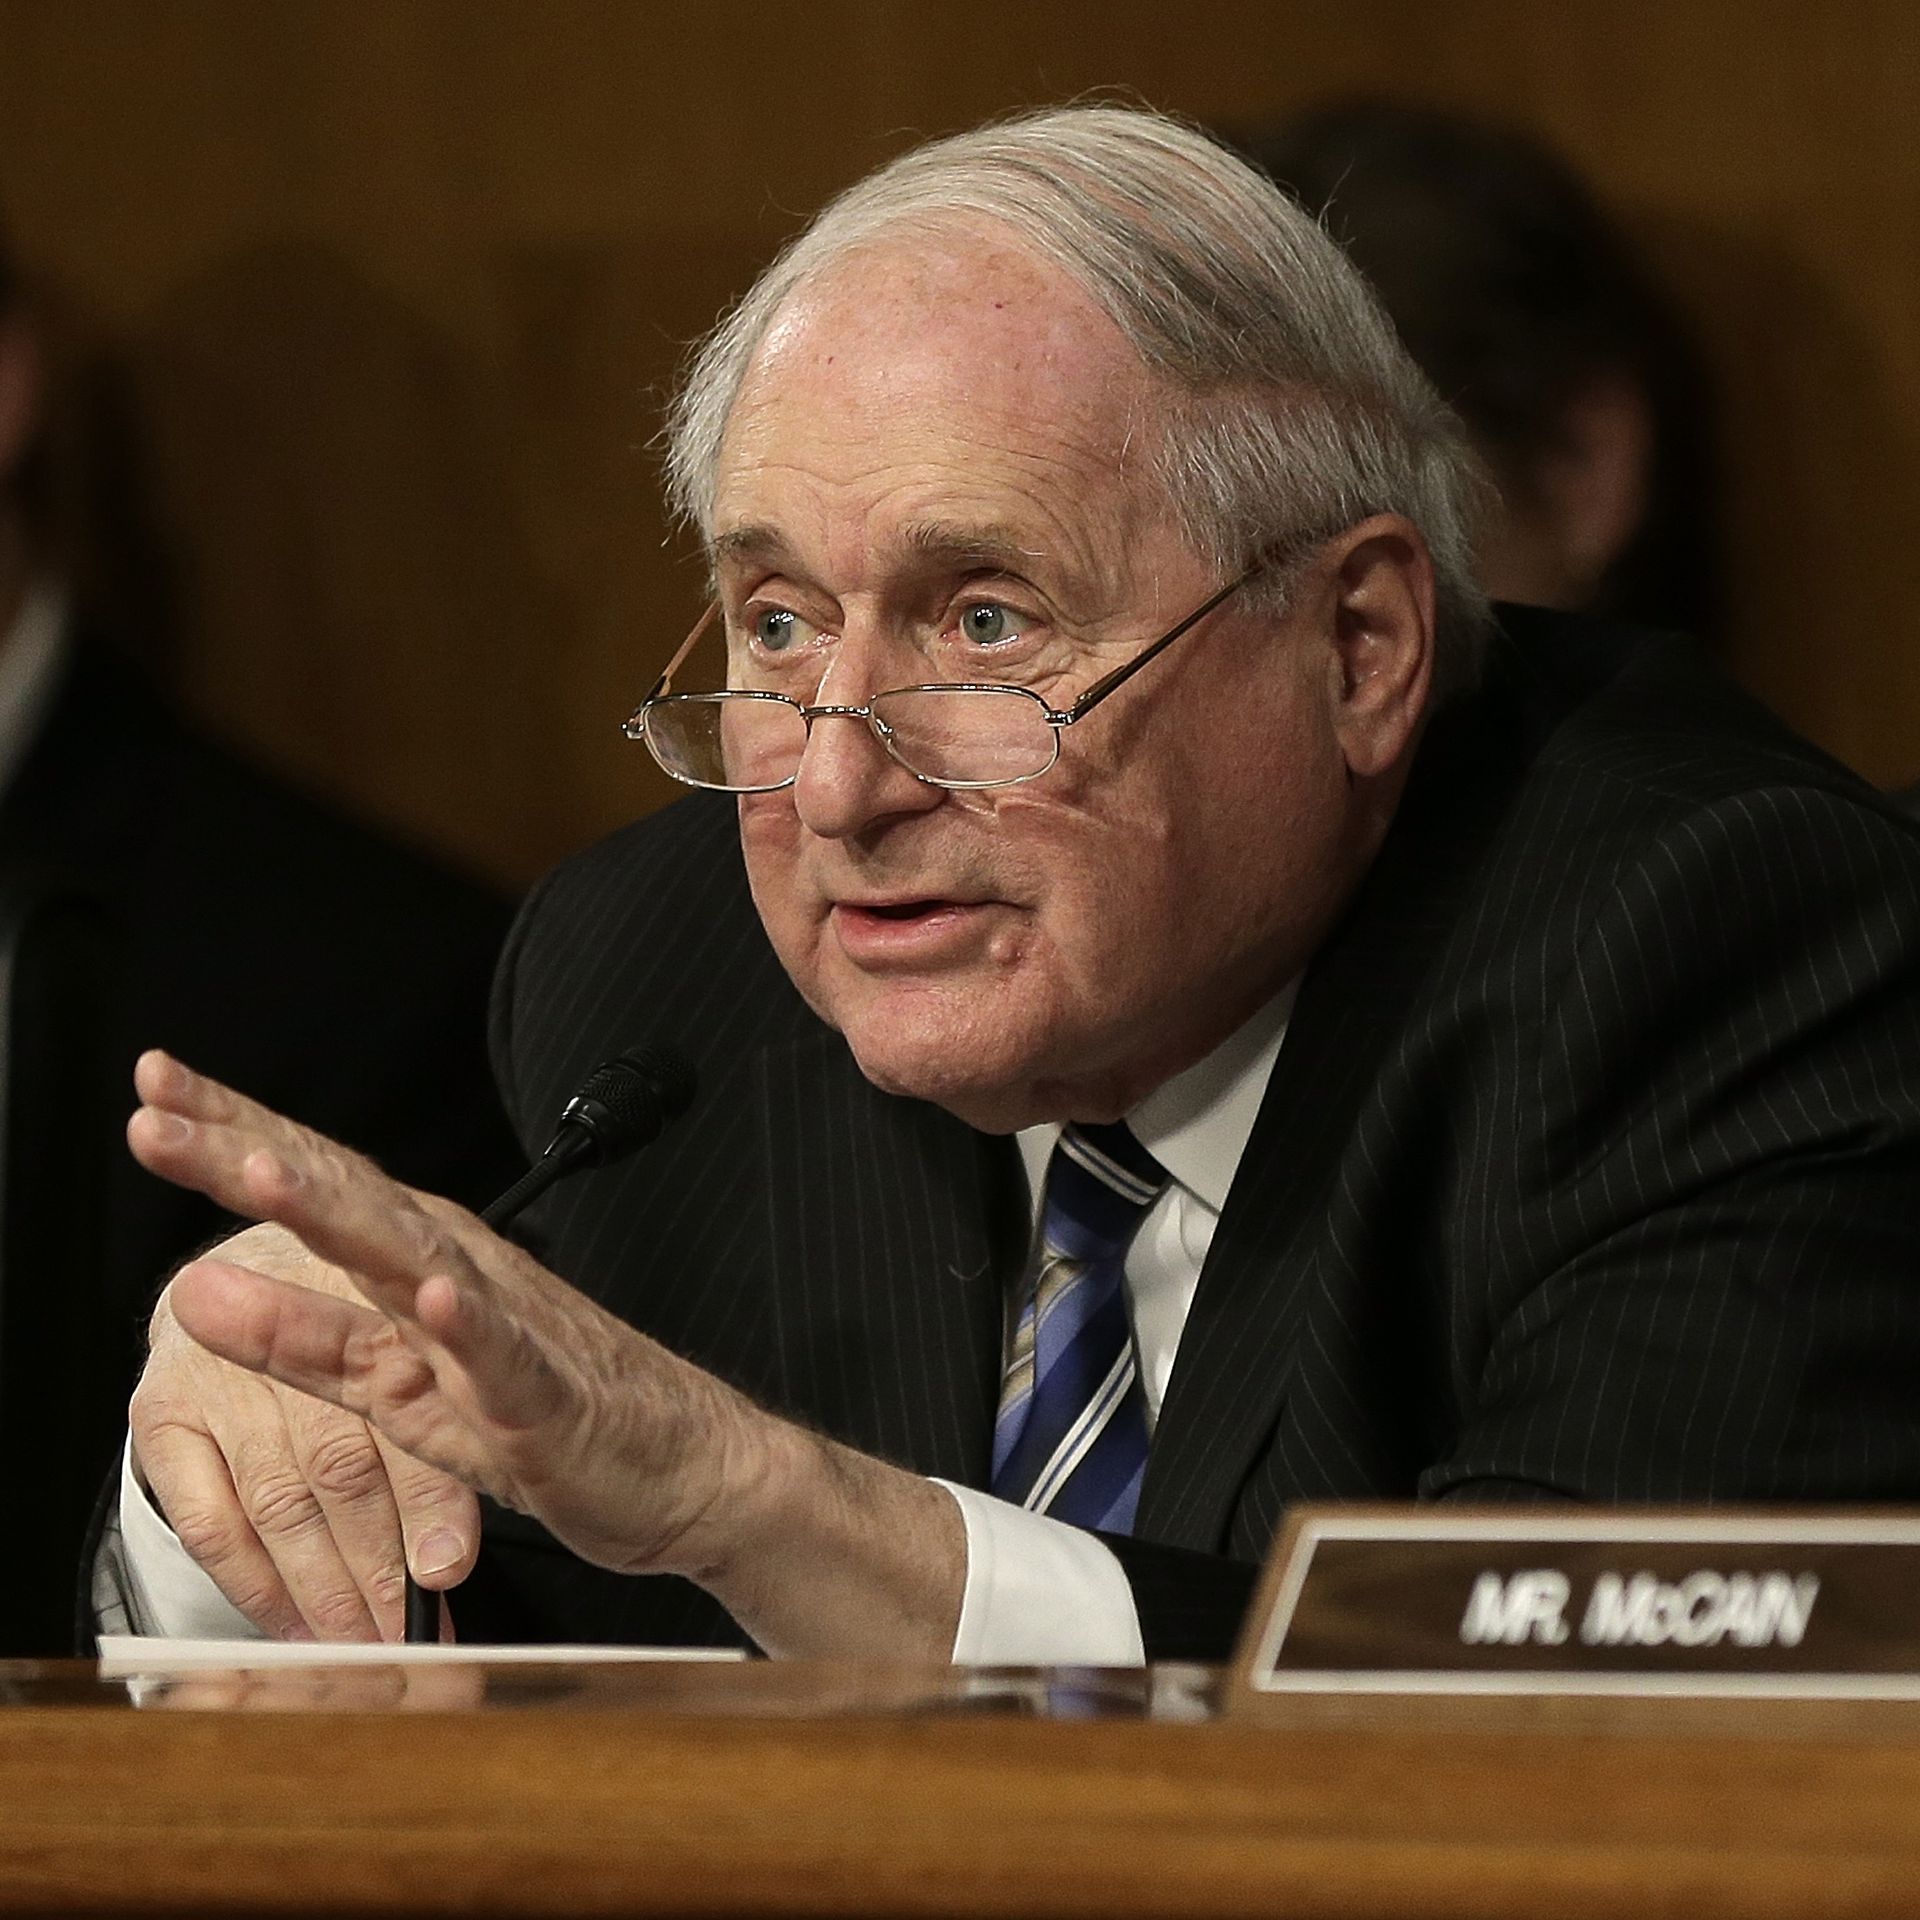 Sen. Carl Levin gestures while seated at a podium